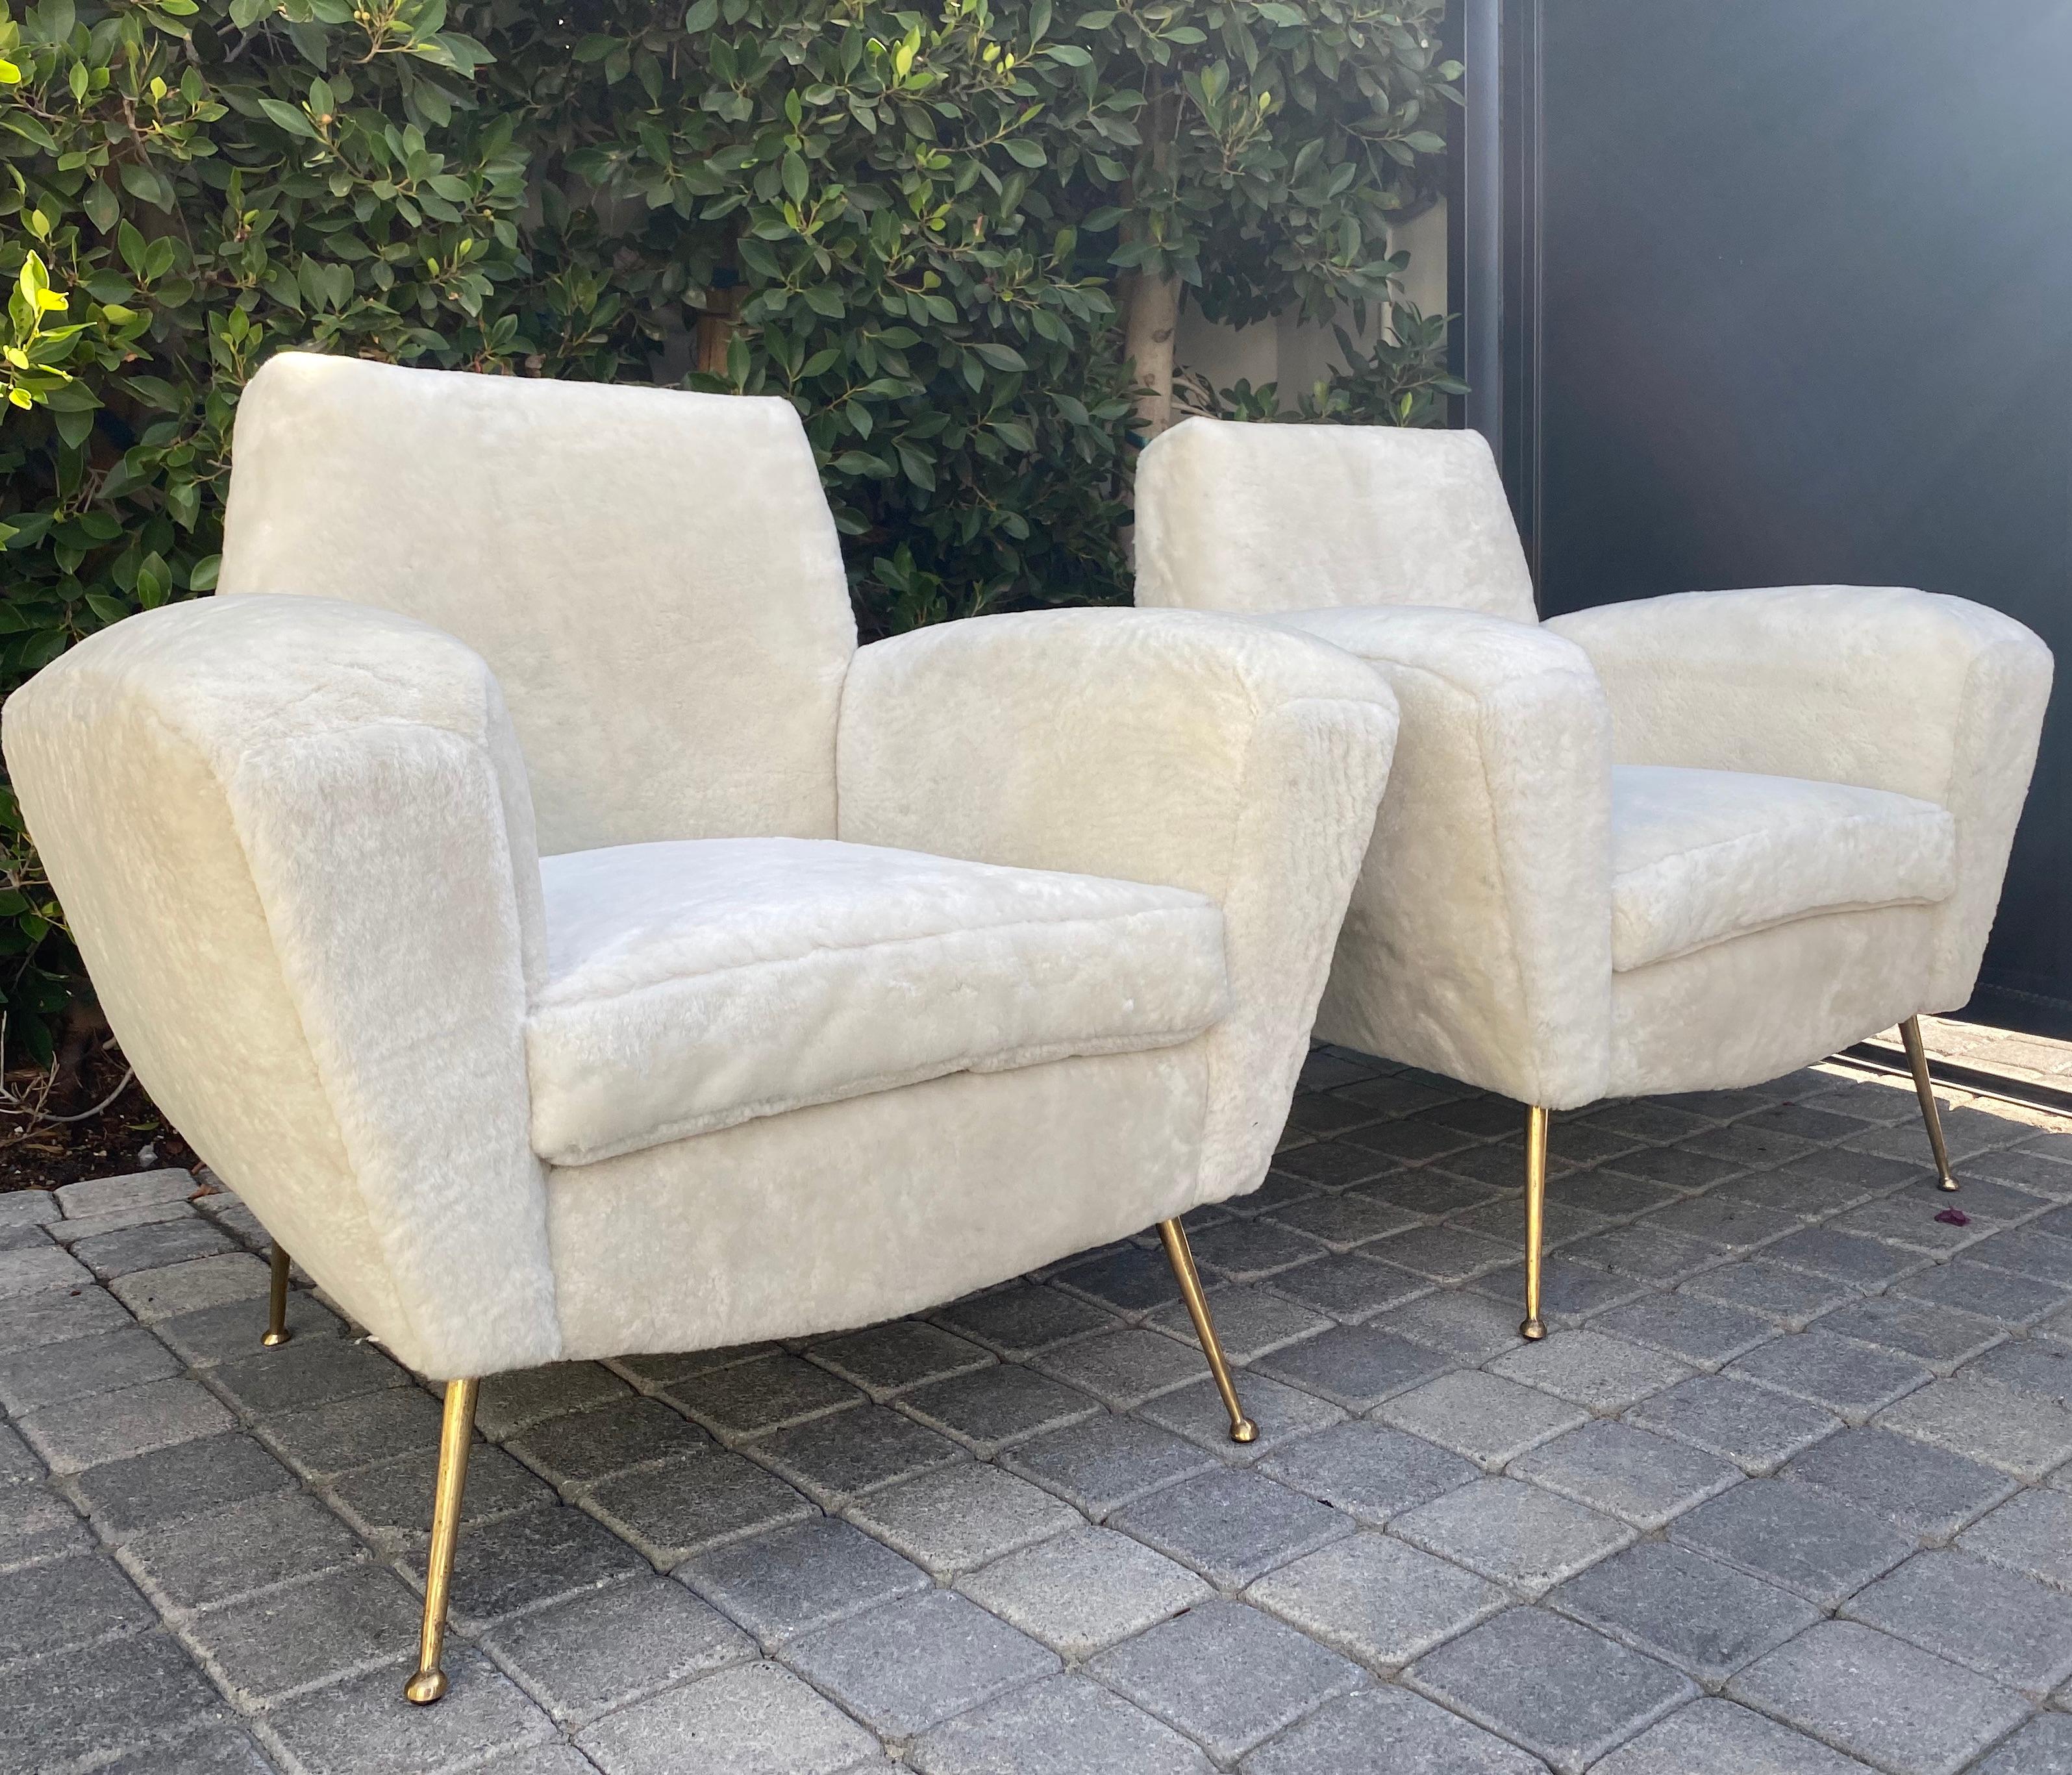 Pair of Midcentury Italian Club Chairs in White Shearling Inspired by Lenzi 548 In Good Condition For Sale In West Hollywood, CA